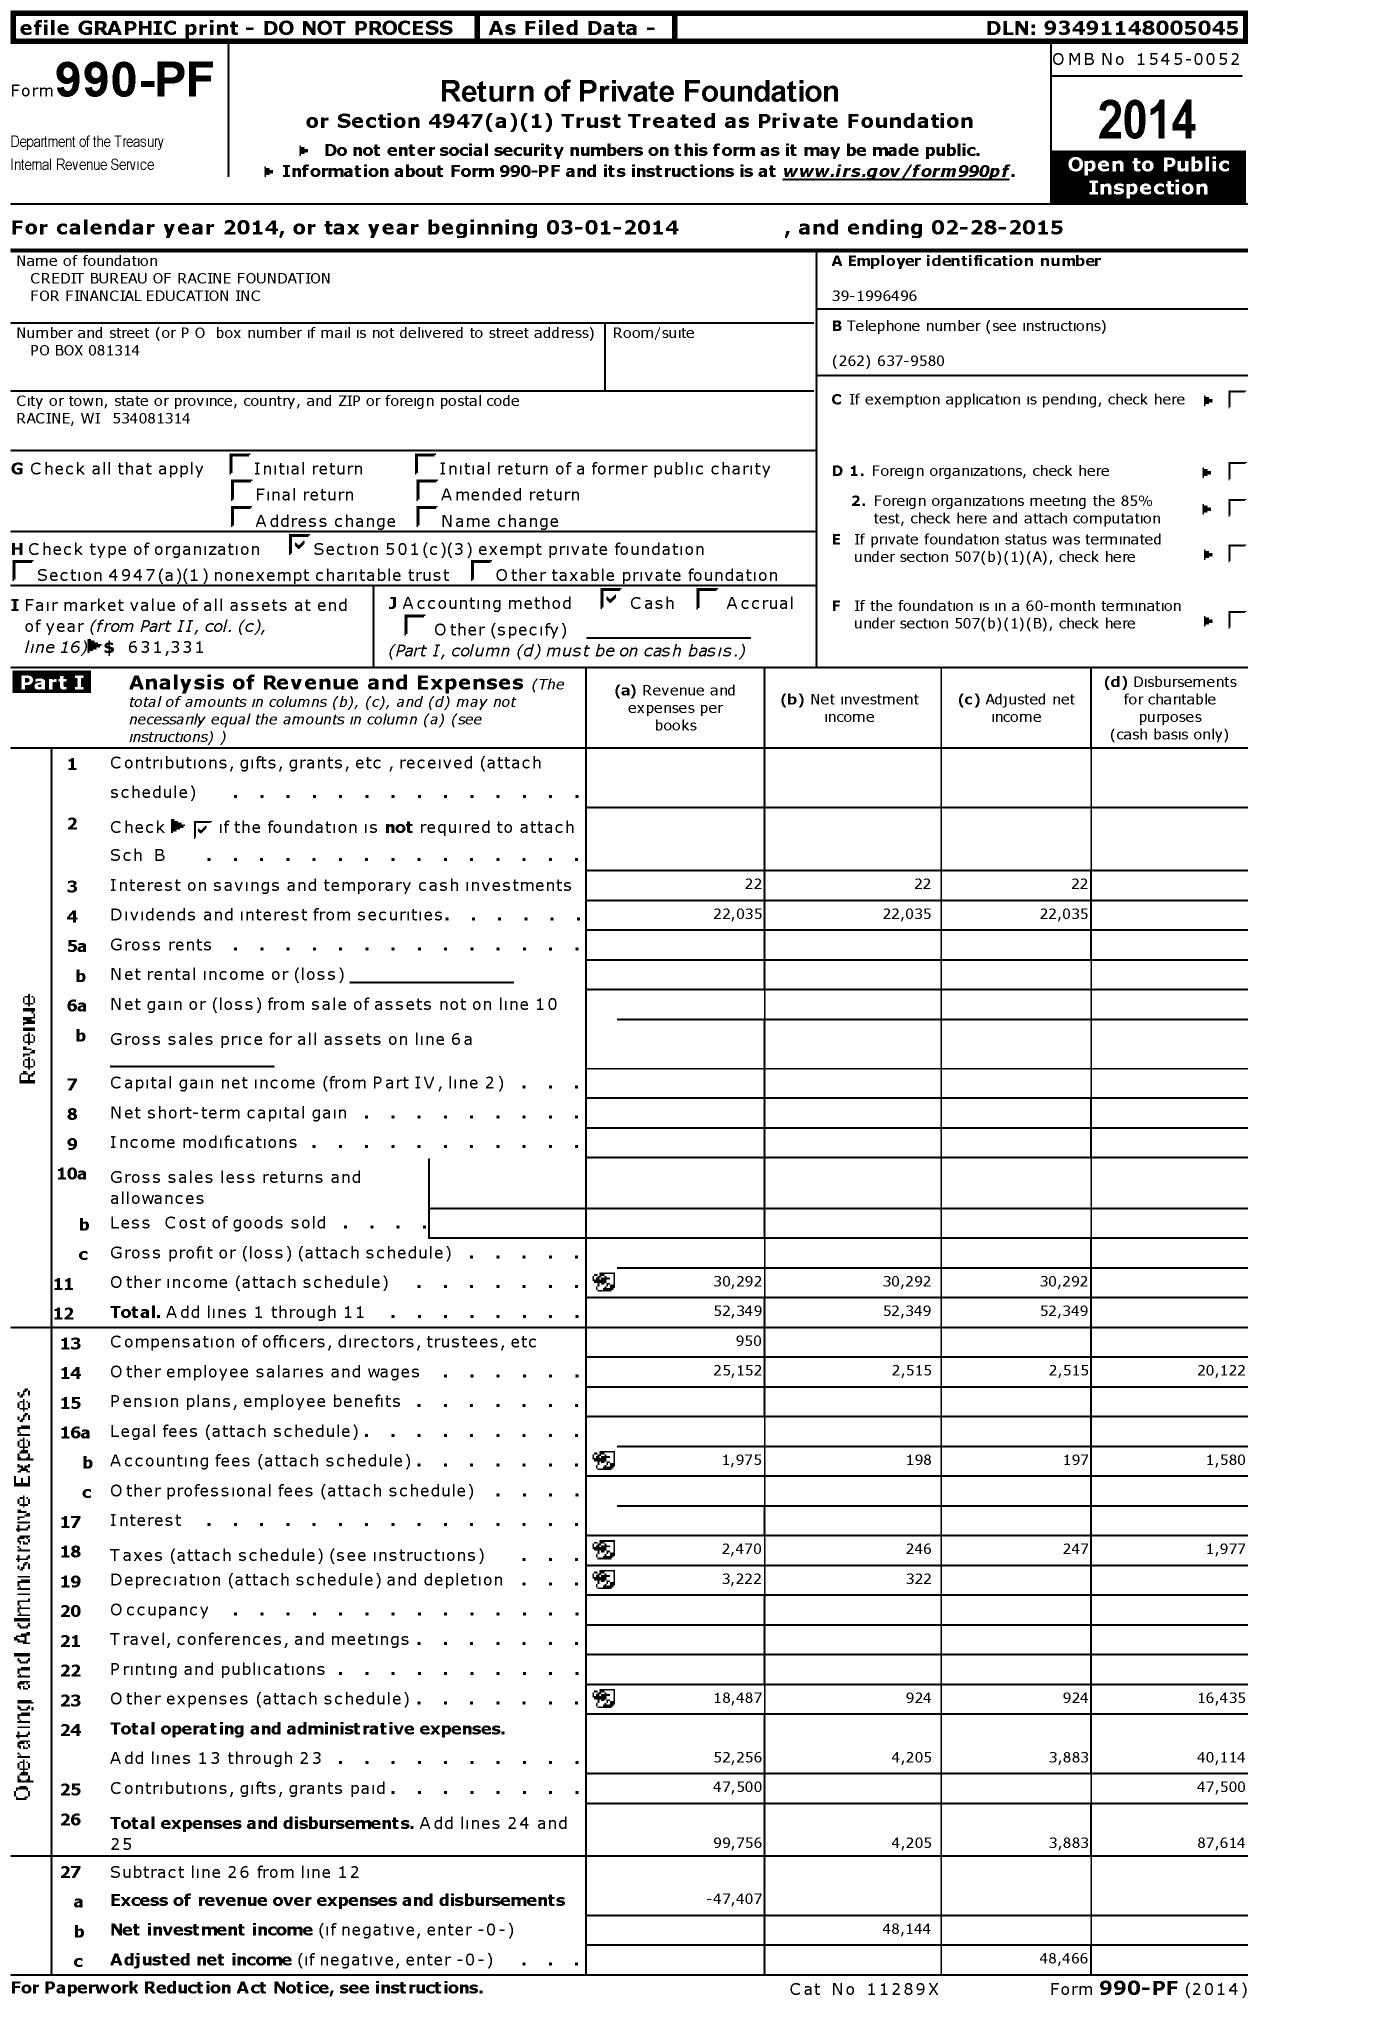 Image of first page of 2014 Form 990PF for Credit Bureau of Racine Foundation for Financial Education